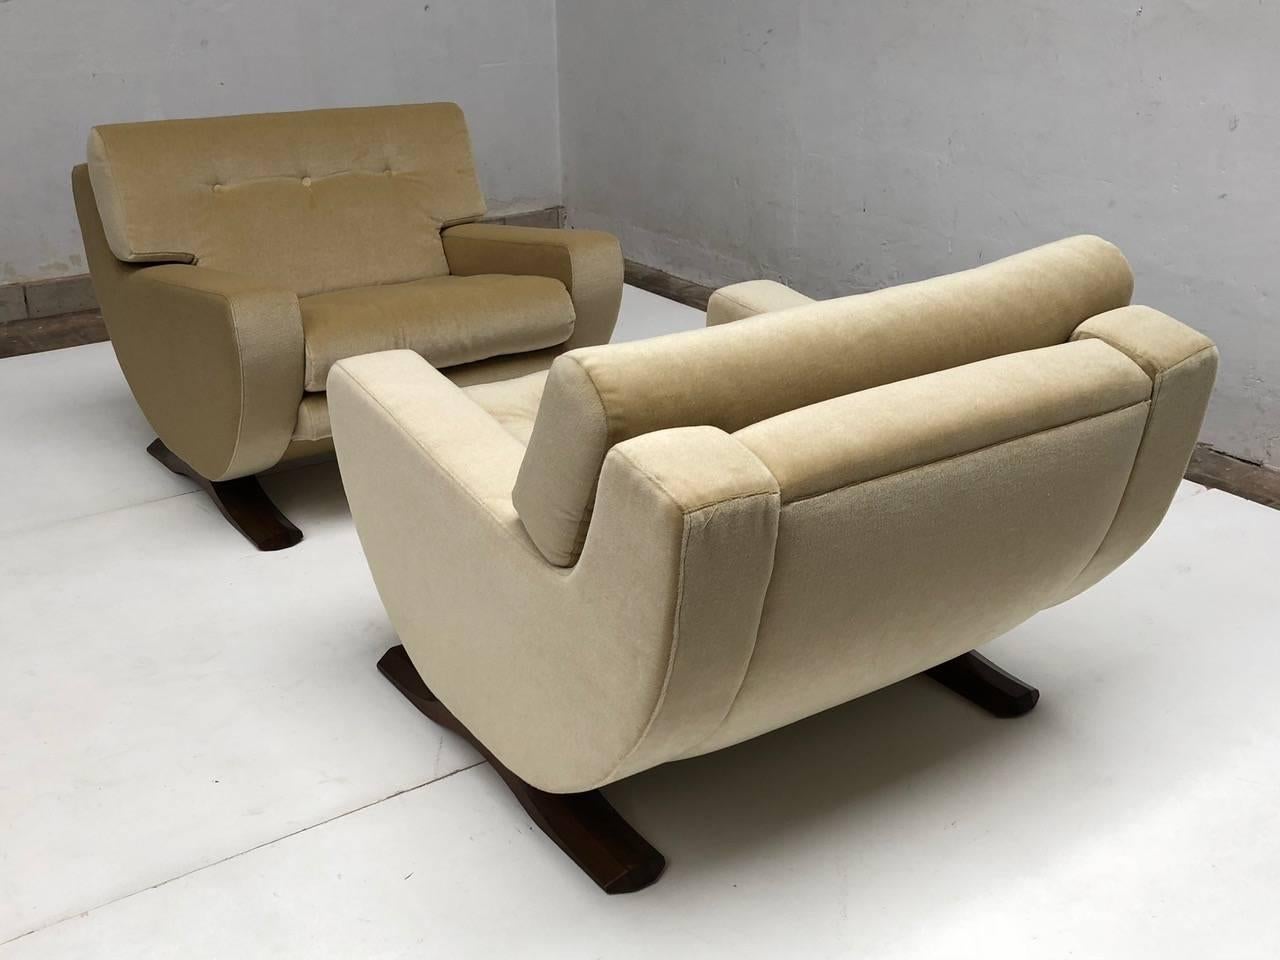 Stained Rare Mohair Lounge Chairs by Italian Sculptor Franz T Sartori, Flexform, 1965